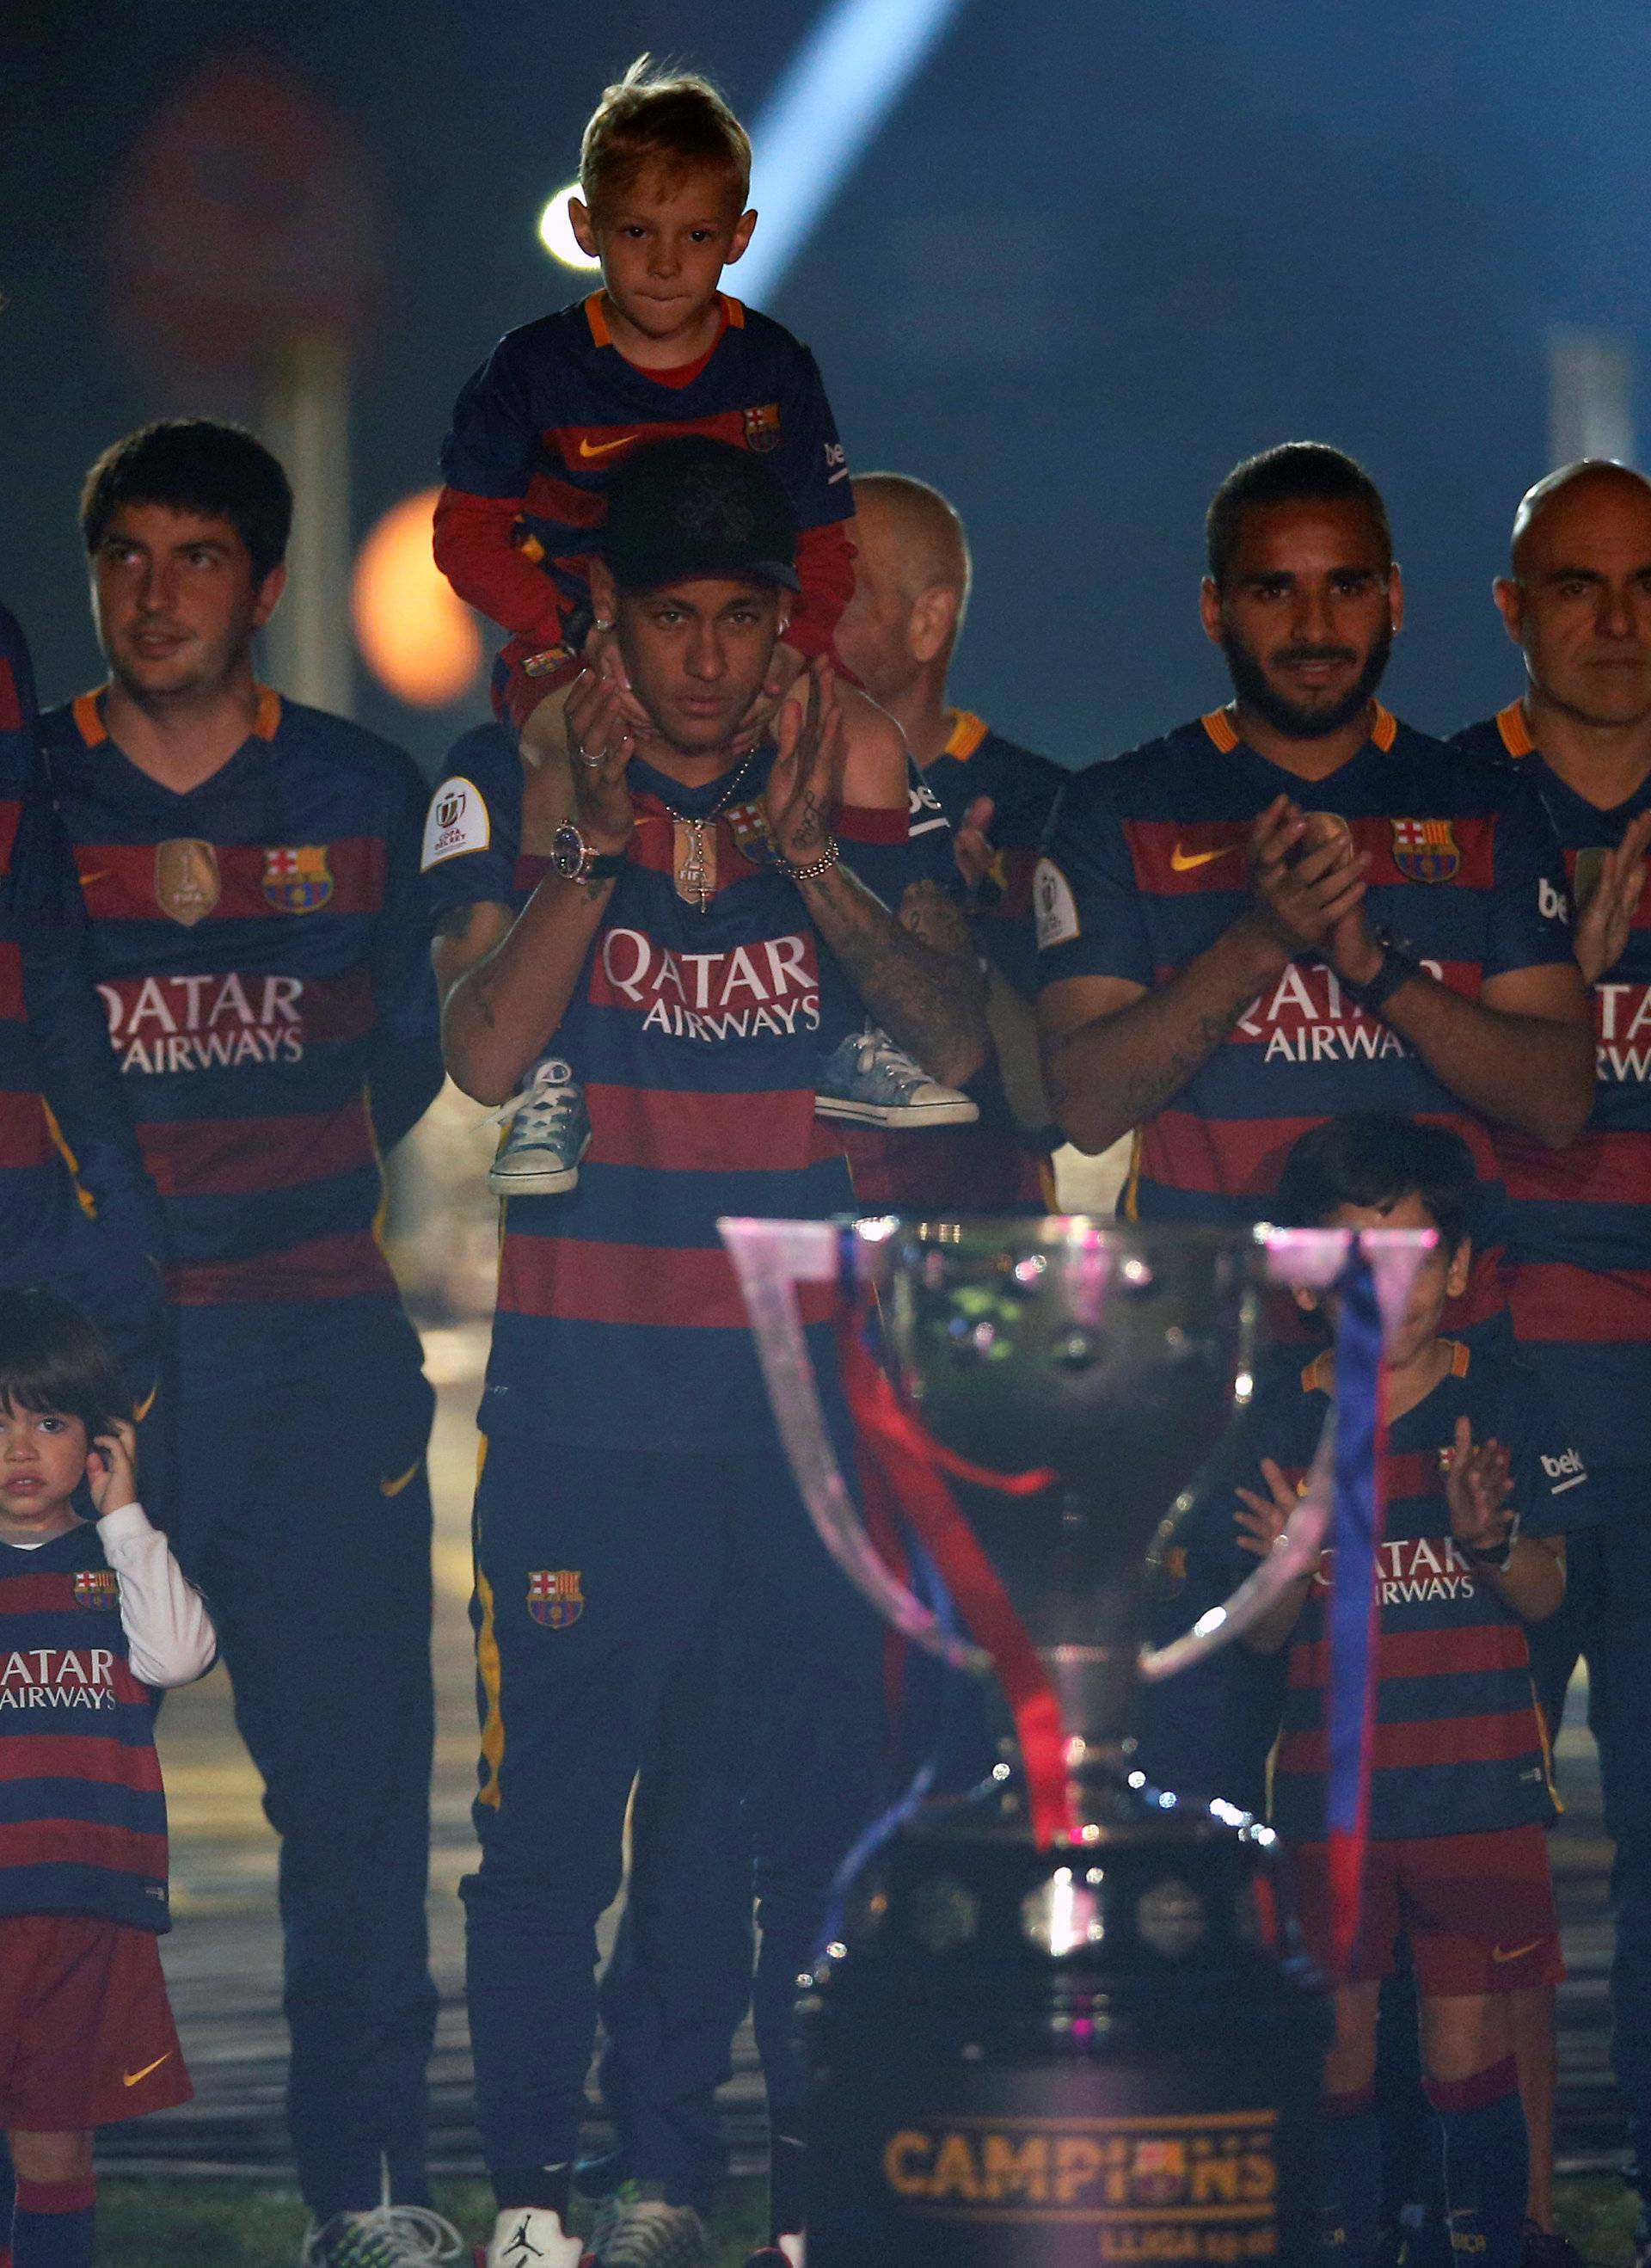 Barcelona's players and staff members, with their families, pose with their season's trophies at Camp Nou stadium in Barcelona